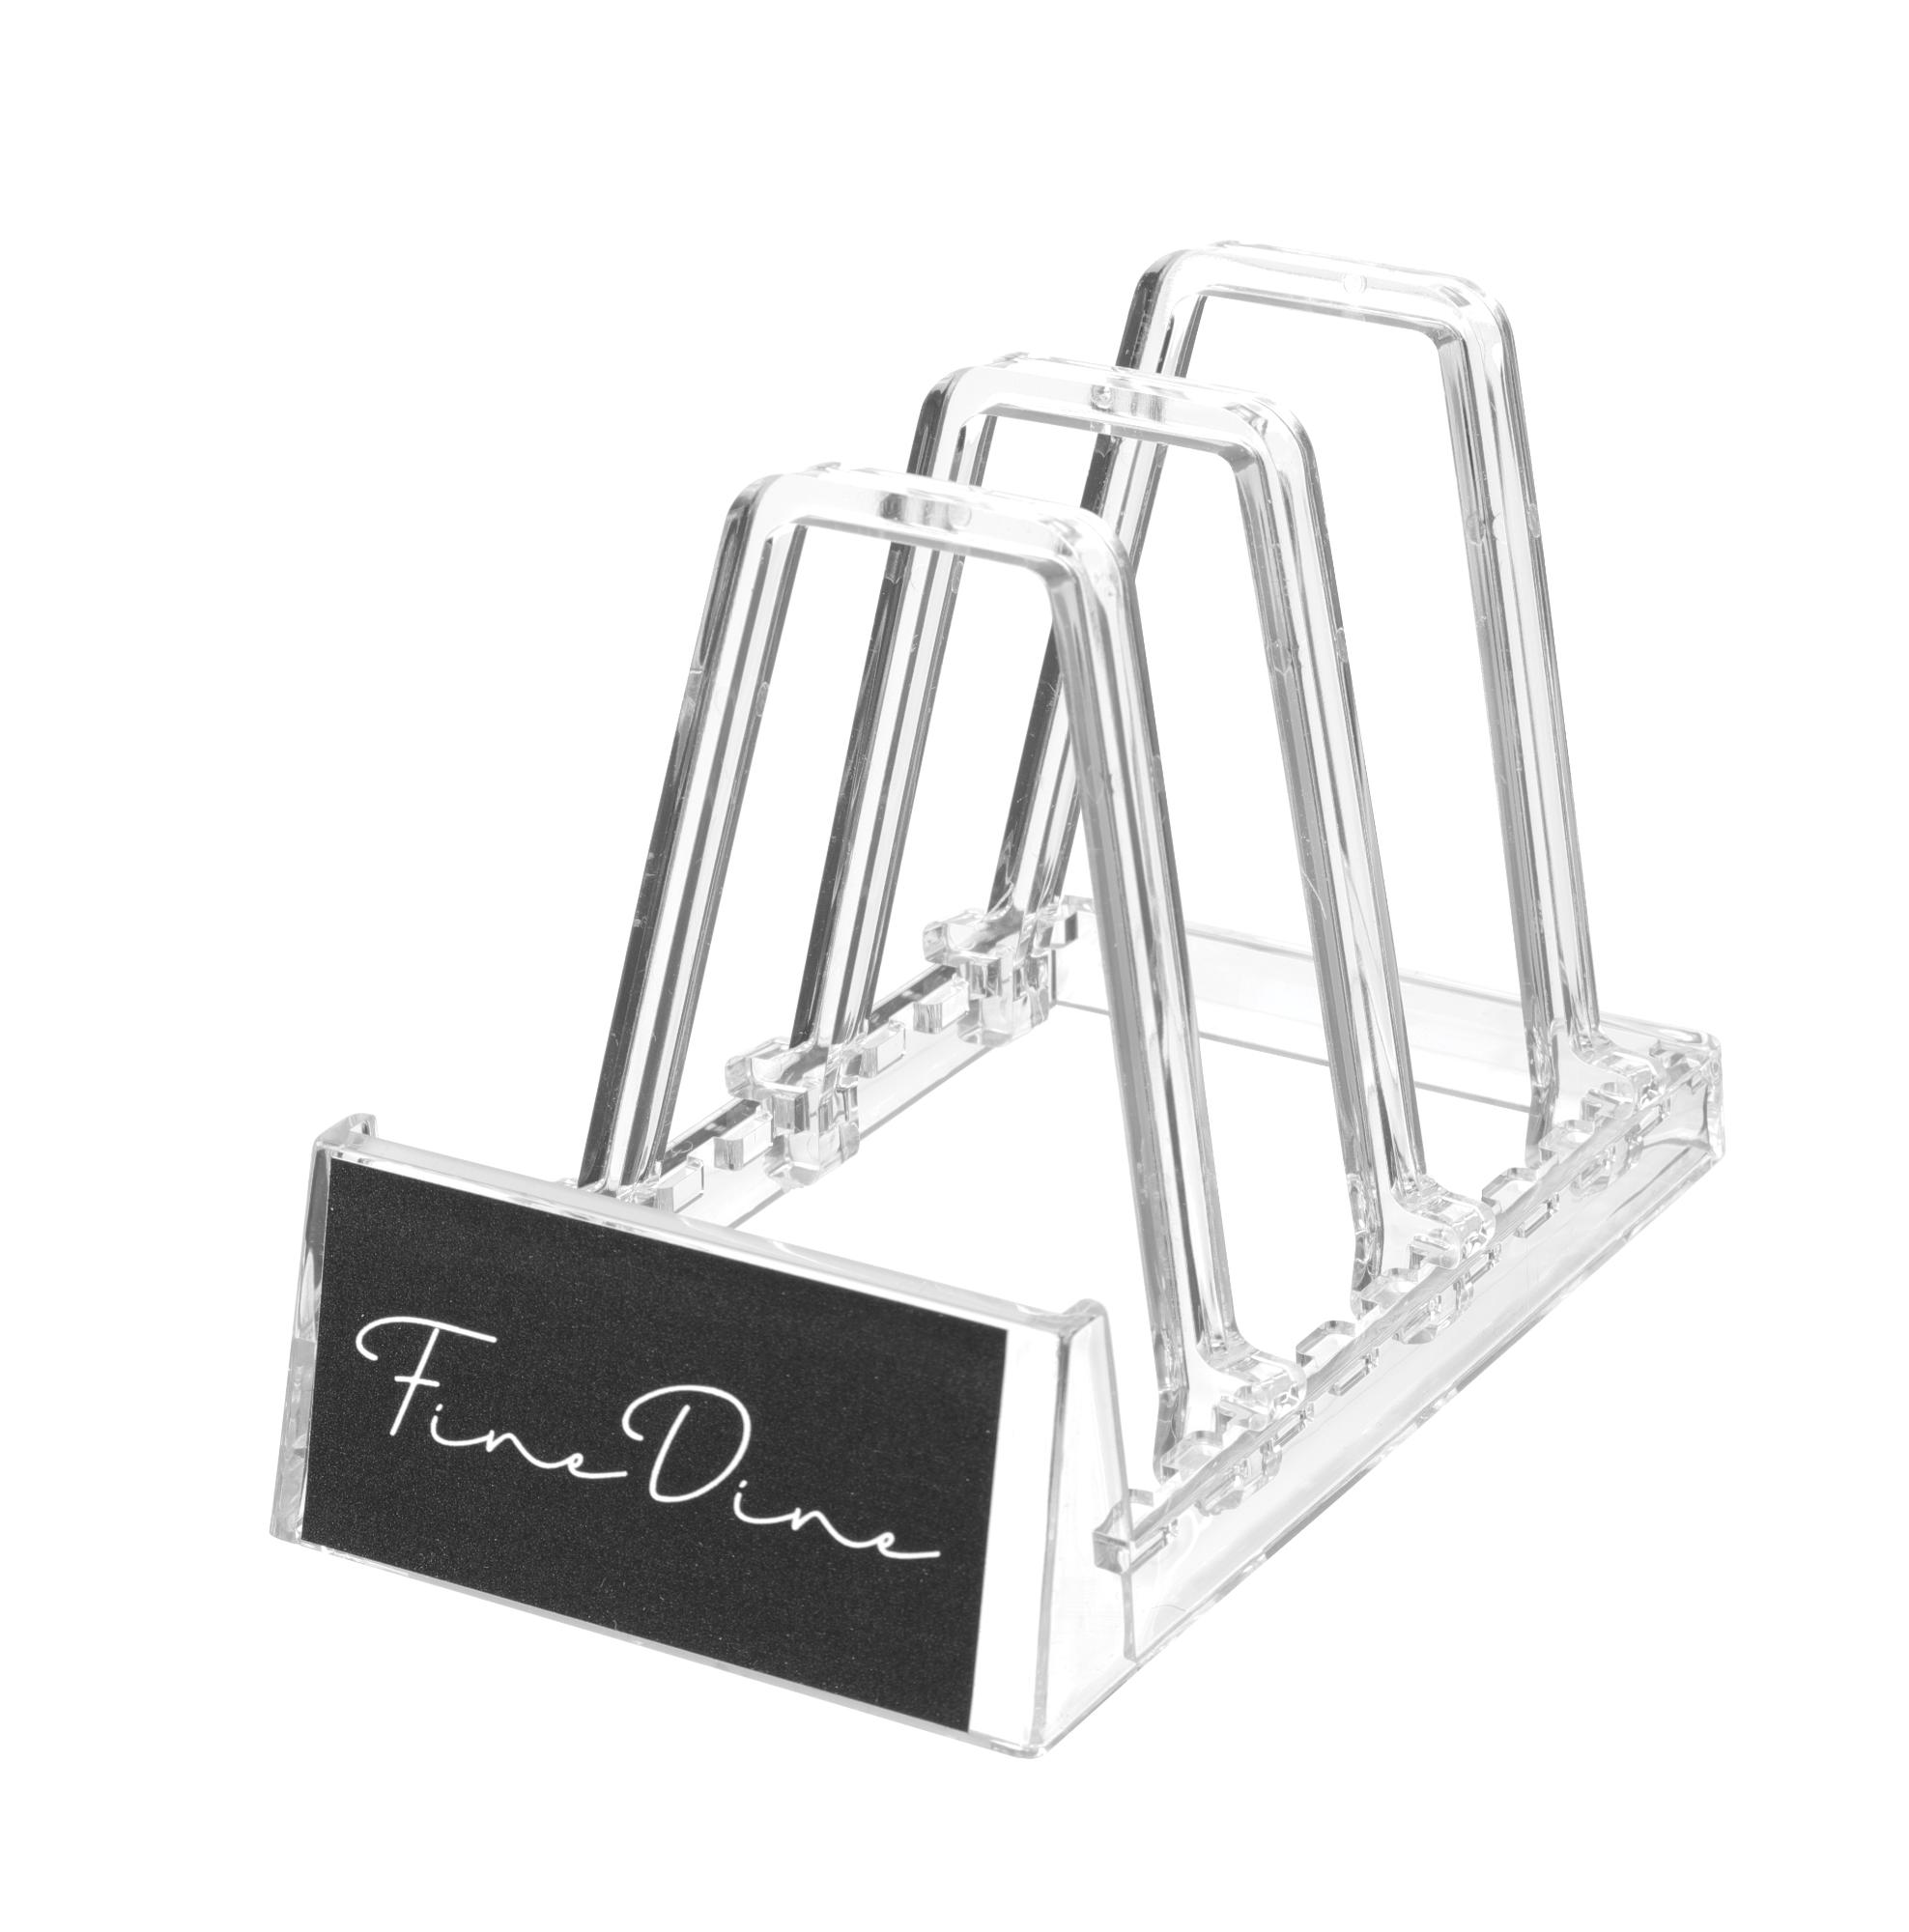 FINE DINE stand for plates